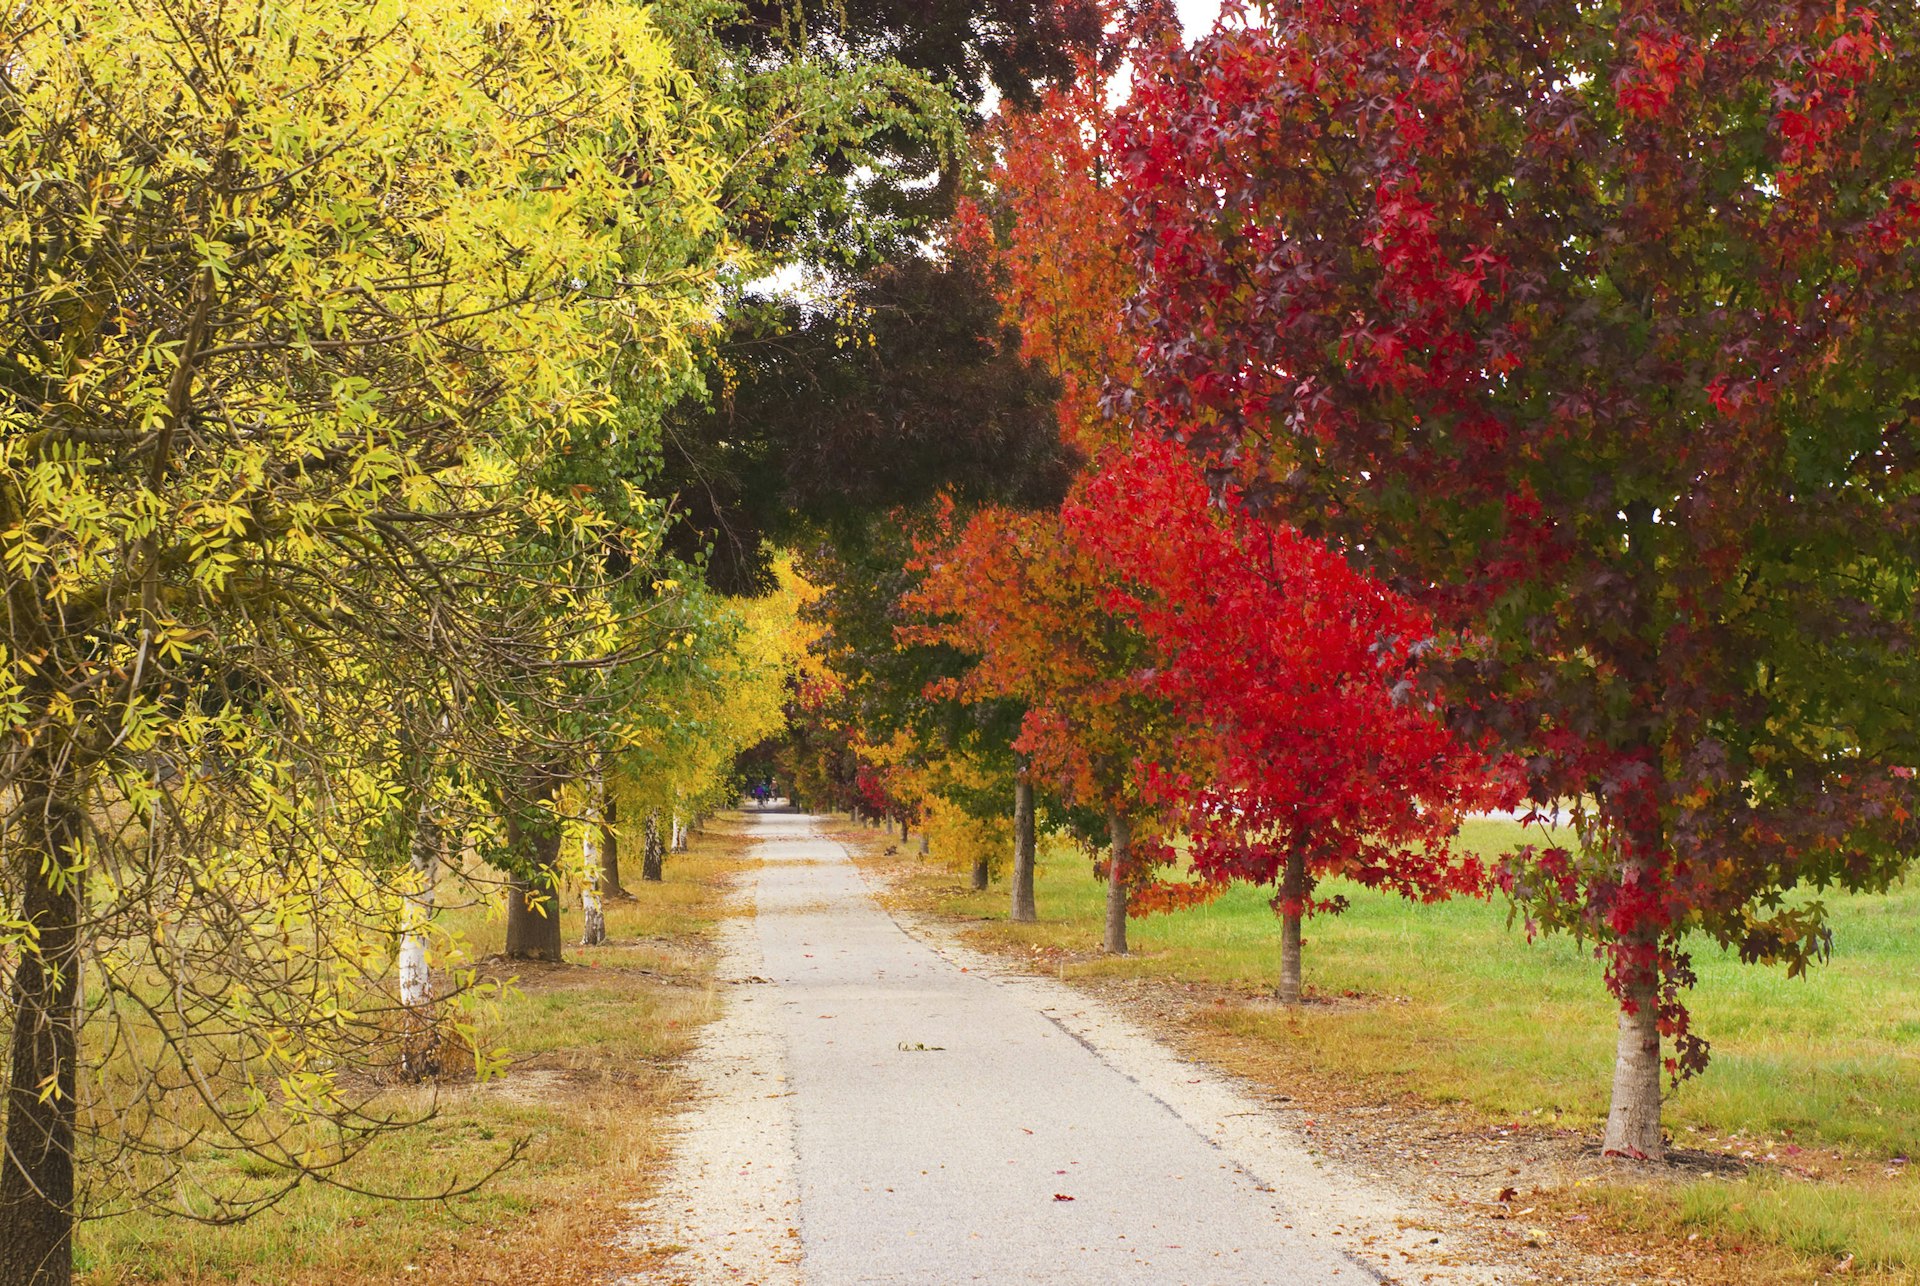 A row of red- and orange-leafed trees flank a walkway through a park in the town of Bright, Australia.